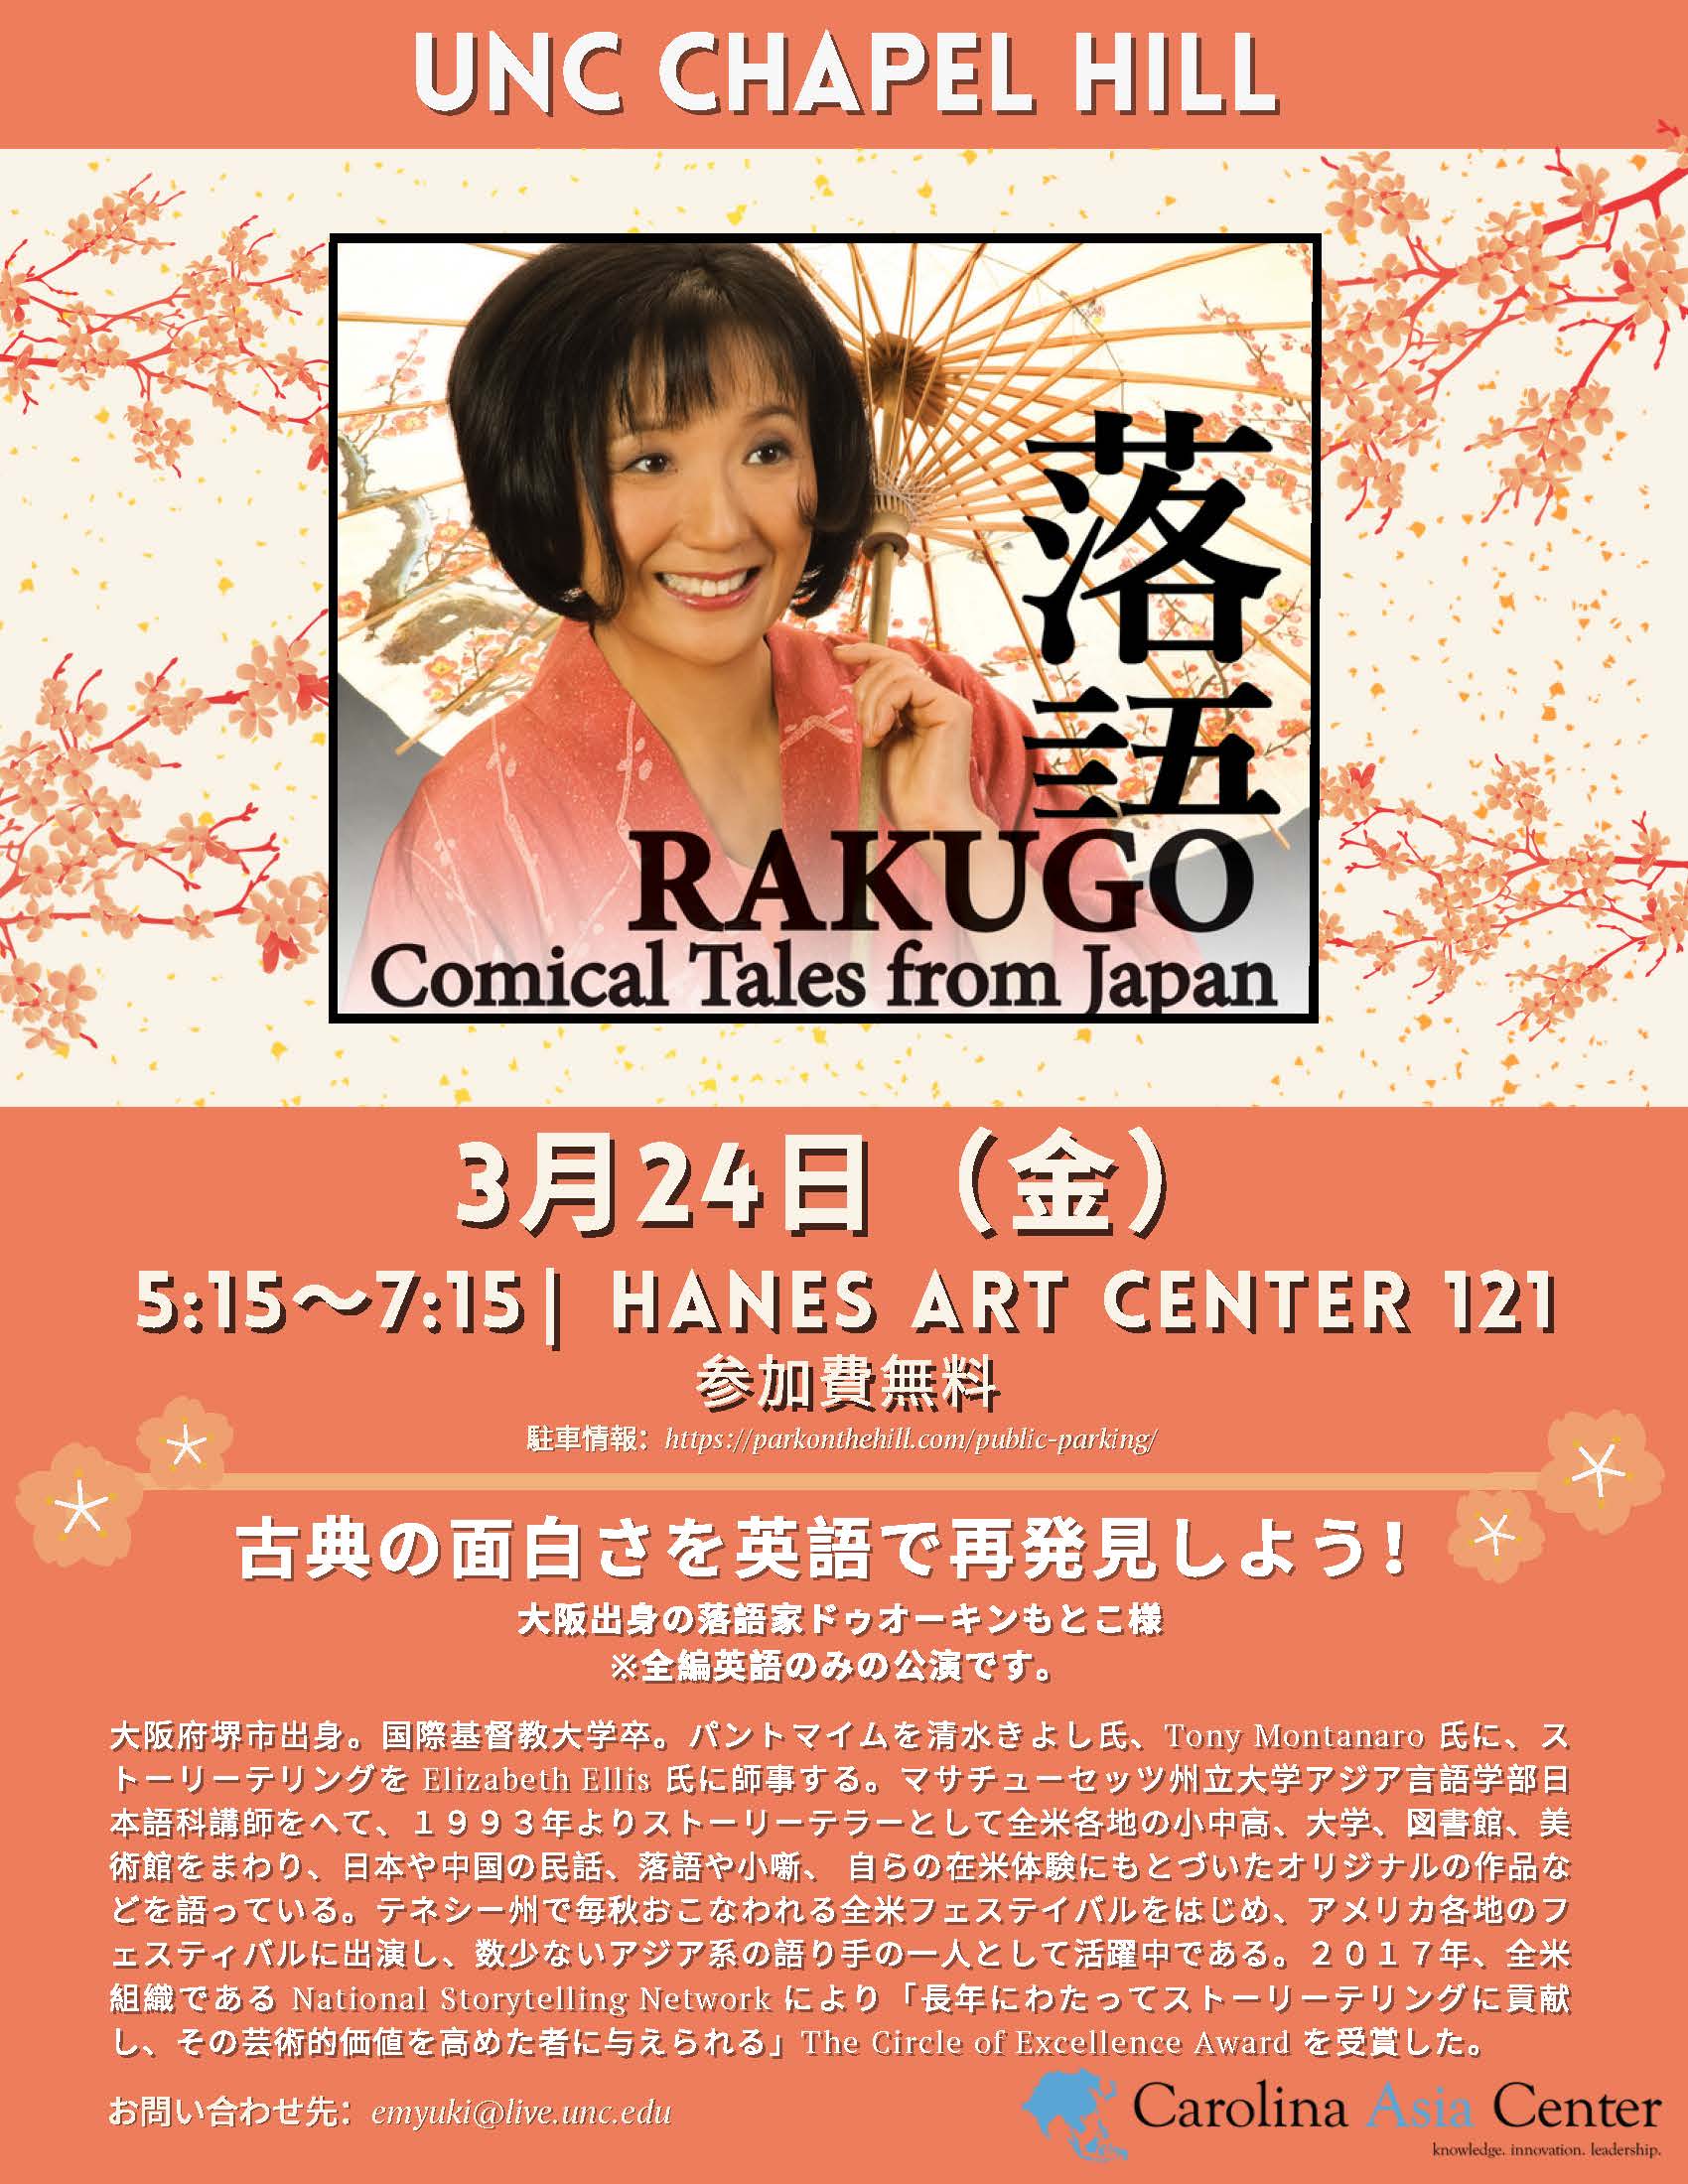 Rakugo, Comical Tales from Japan - Flyer in Japanese